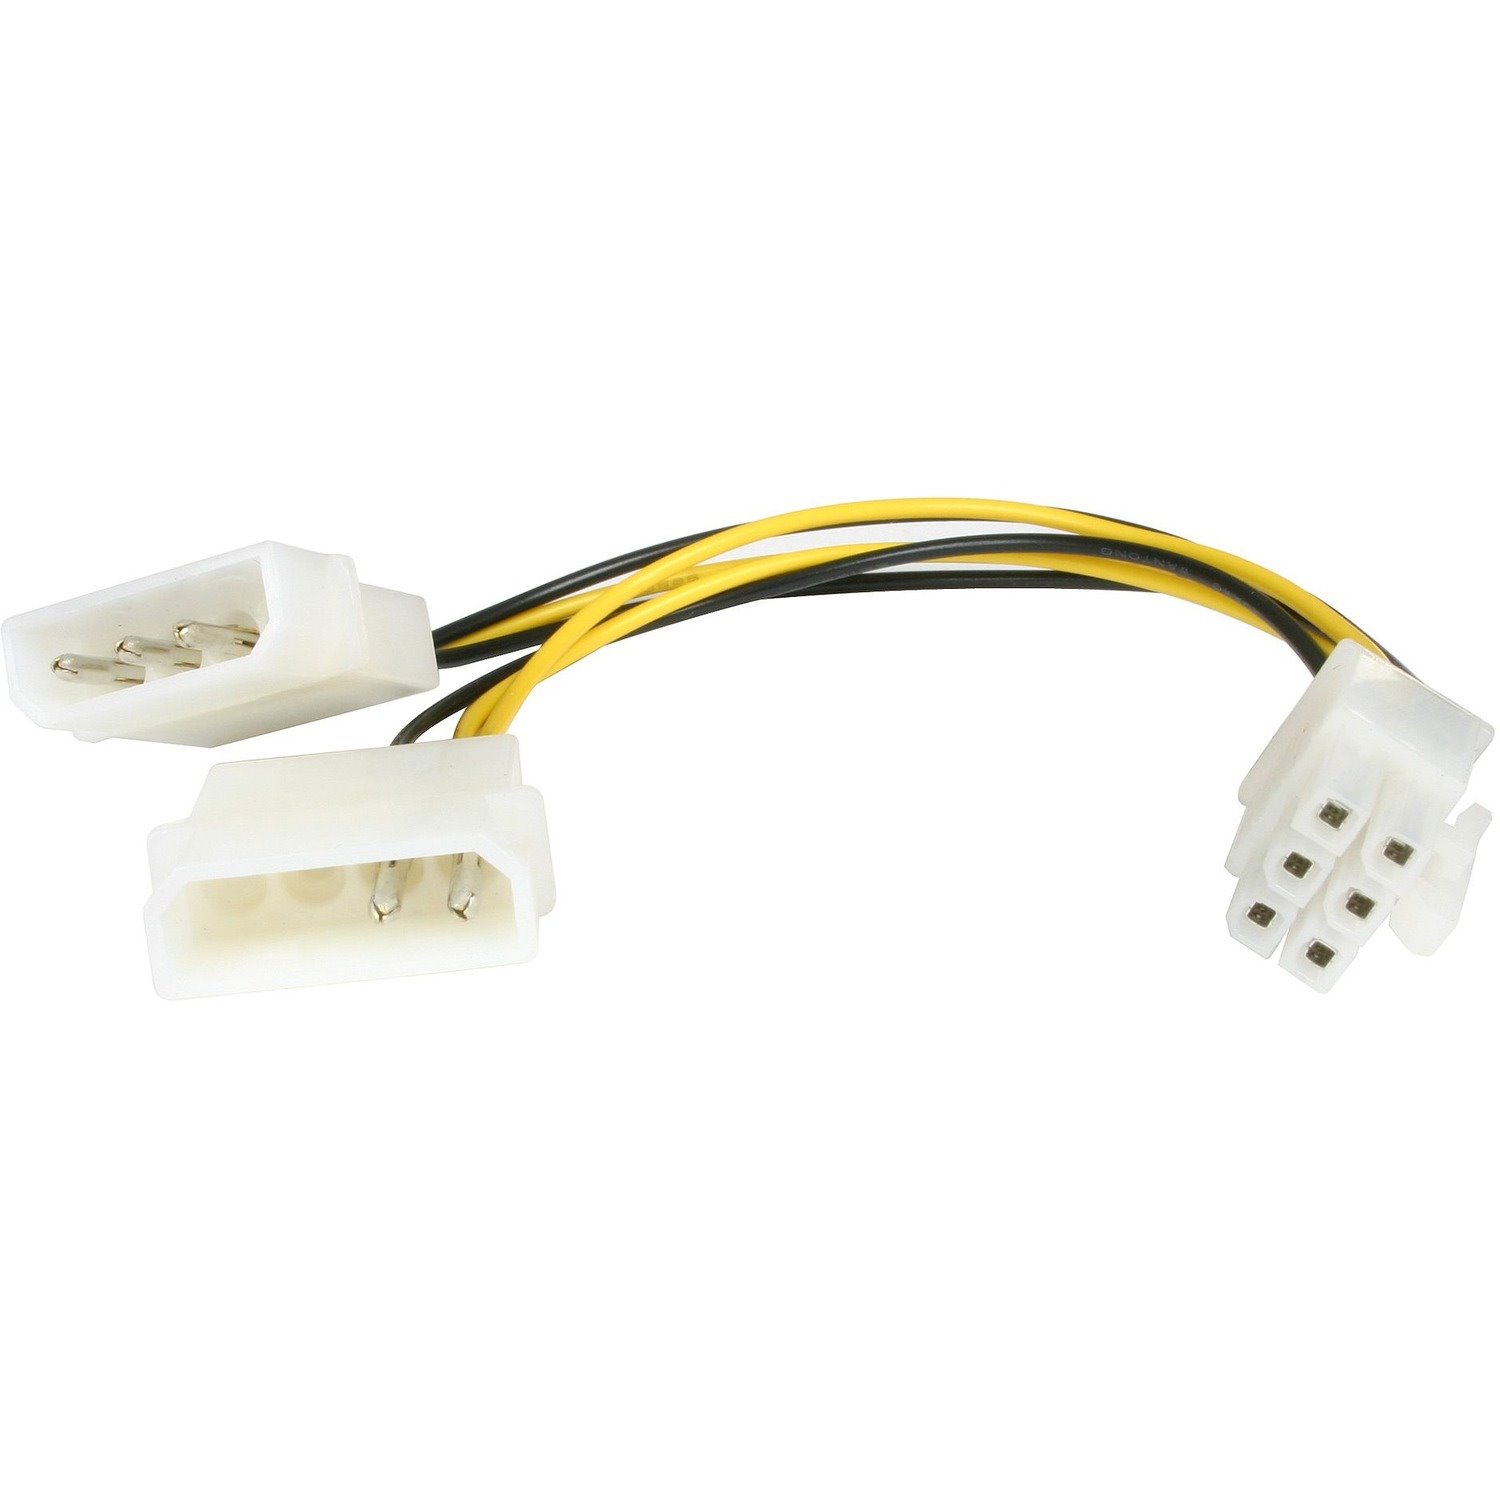 StarTech.com 15cm 6in. LP4 to 6 Pin PCI Express Video Card Power Cable Adapter